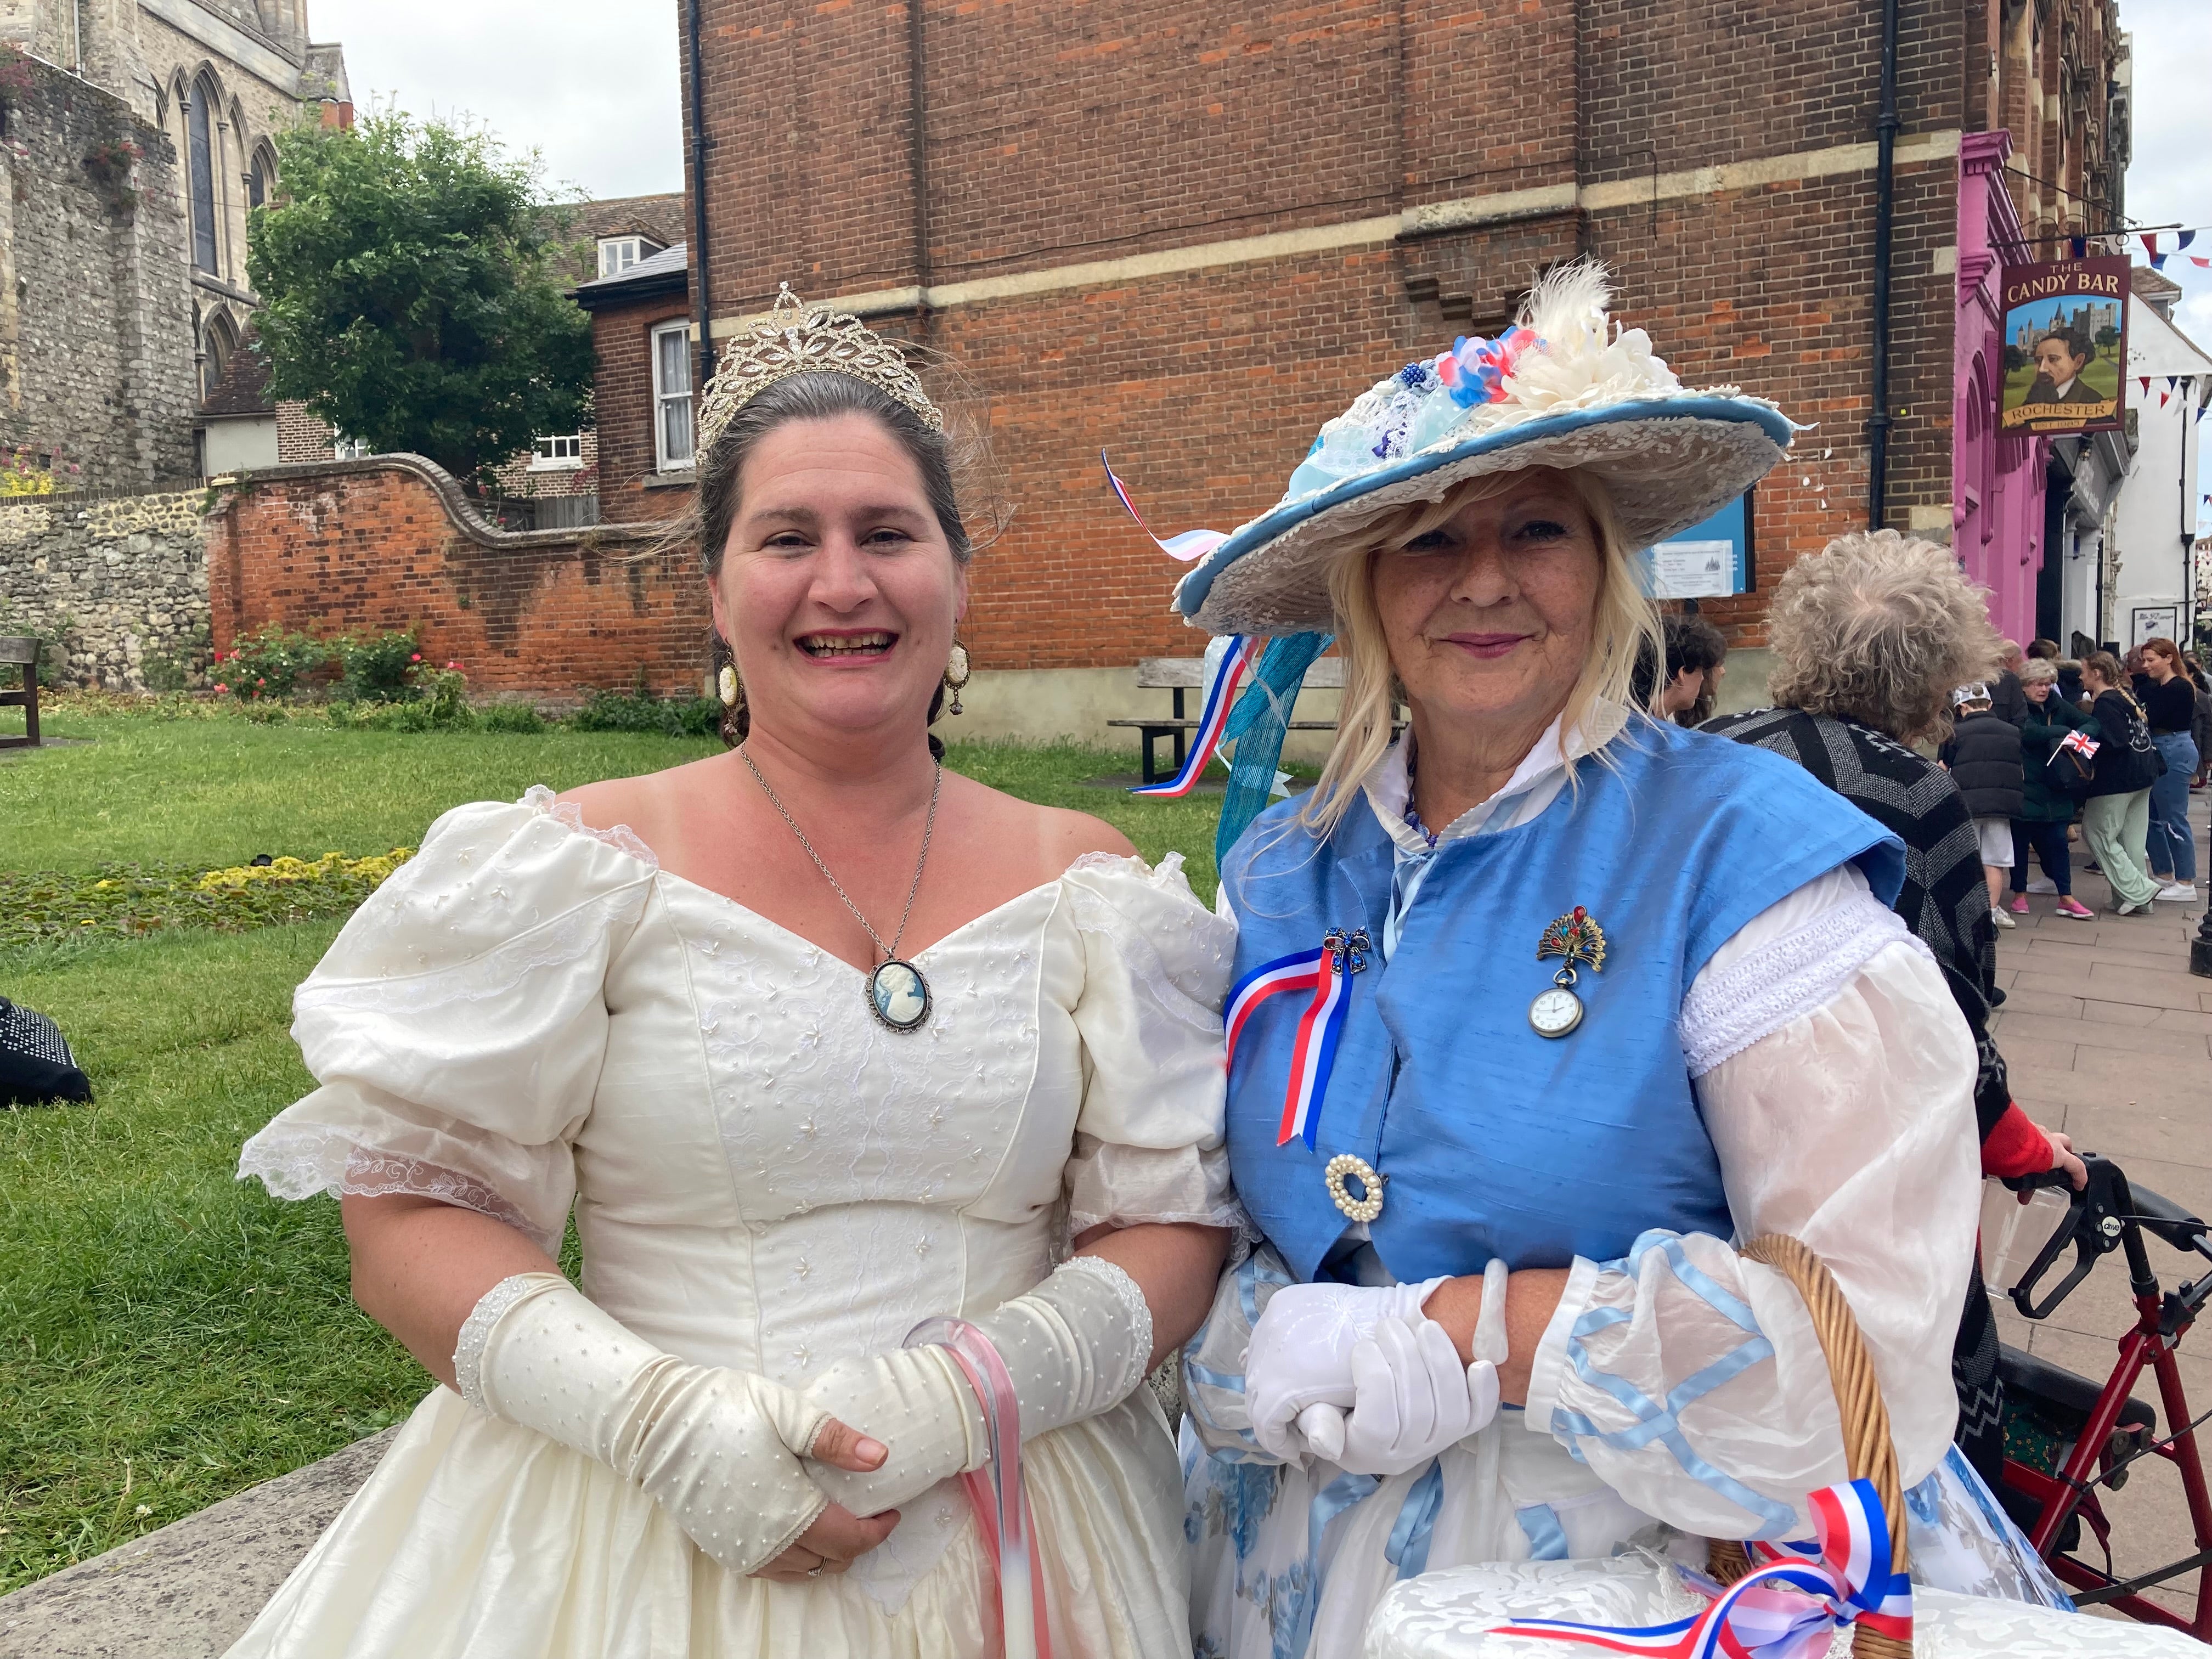 Rebecca Chorley and Sue Smith in Dickensian period dress at the Rochester Dickens Festival marking the Platinum Jubilee on June 4, 2022